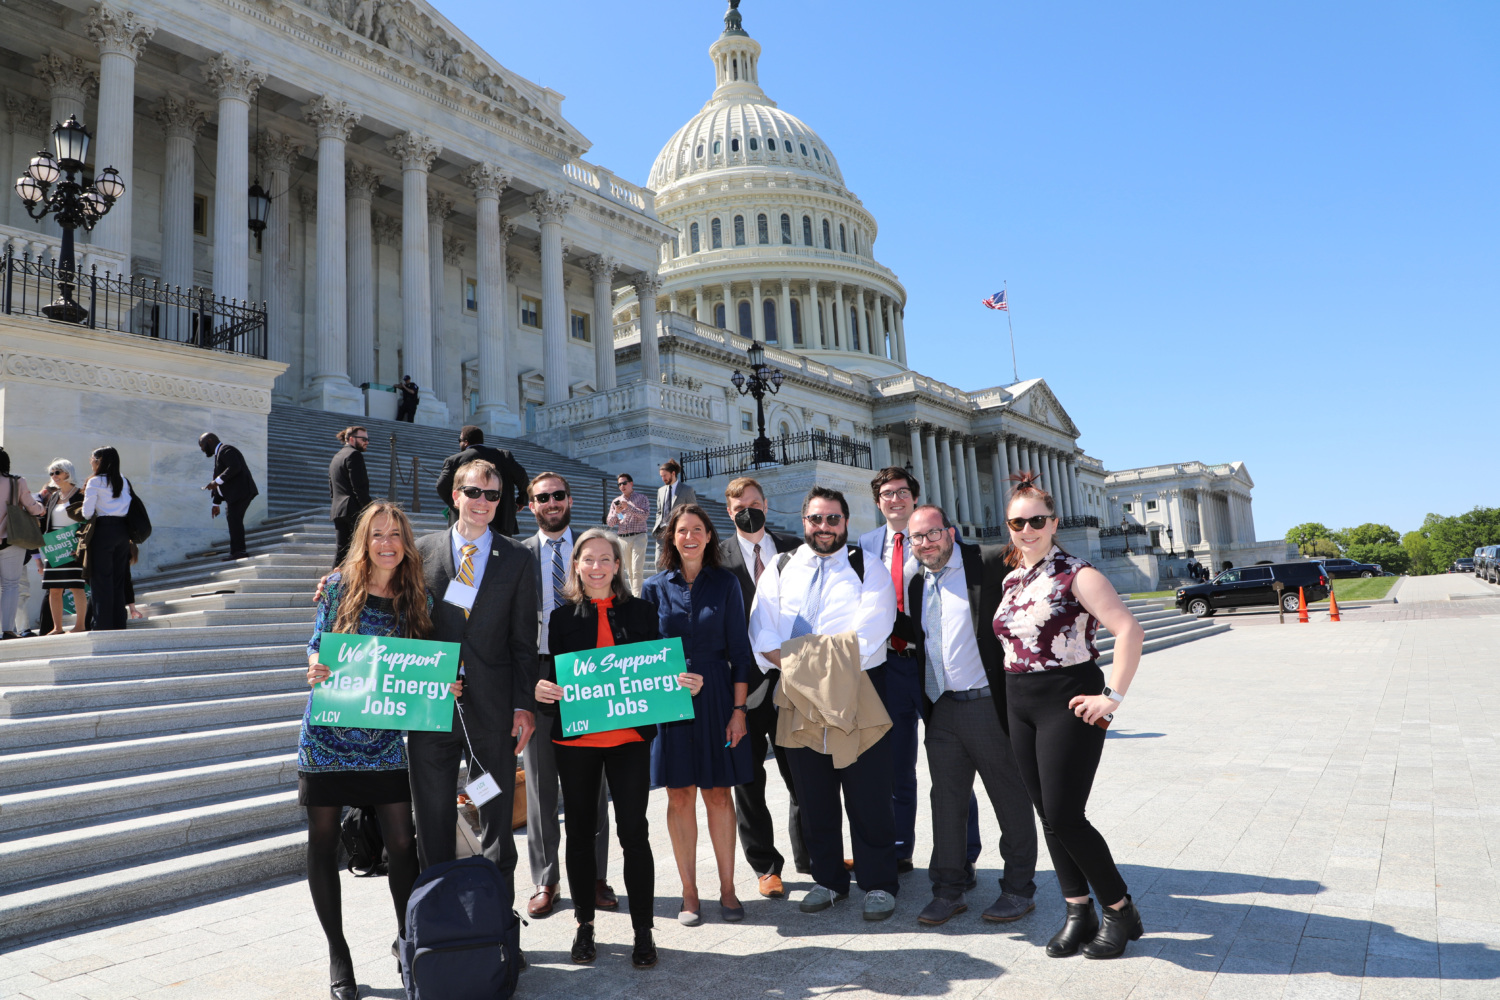 LCV staff pose with "Climate Action Now" and "We Support Clean Energy Jobs" signs in front of Capitol building in DC